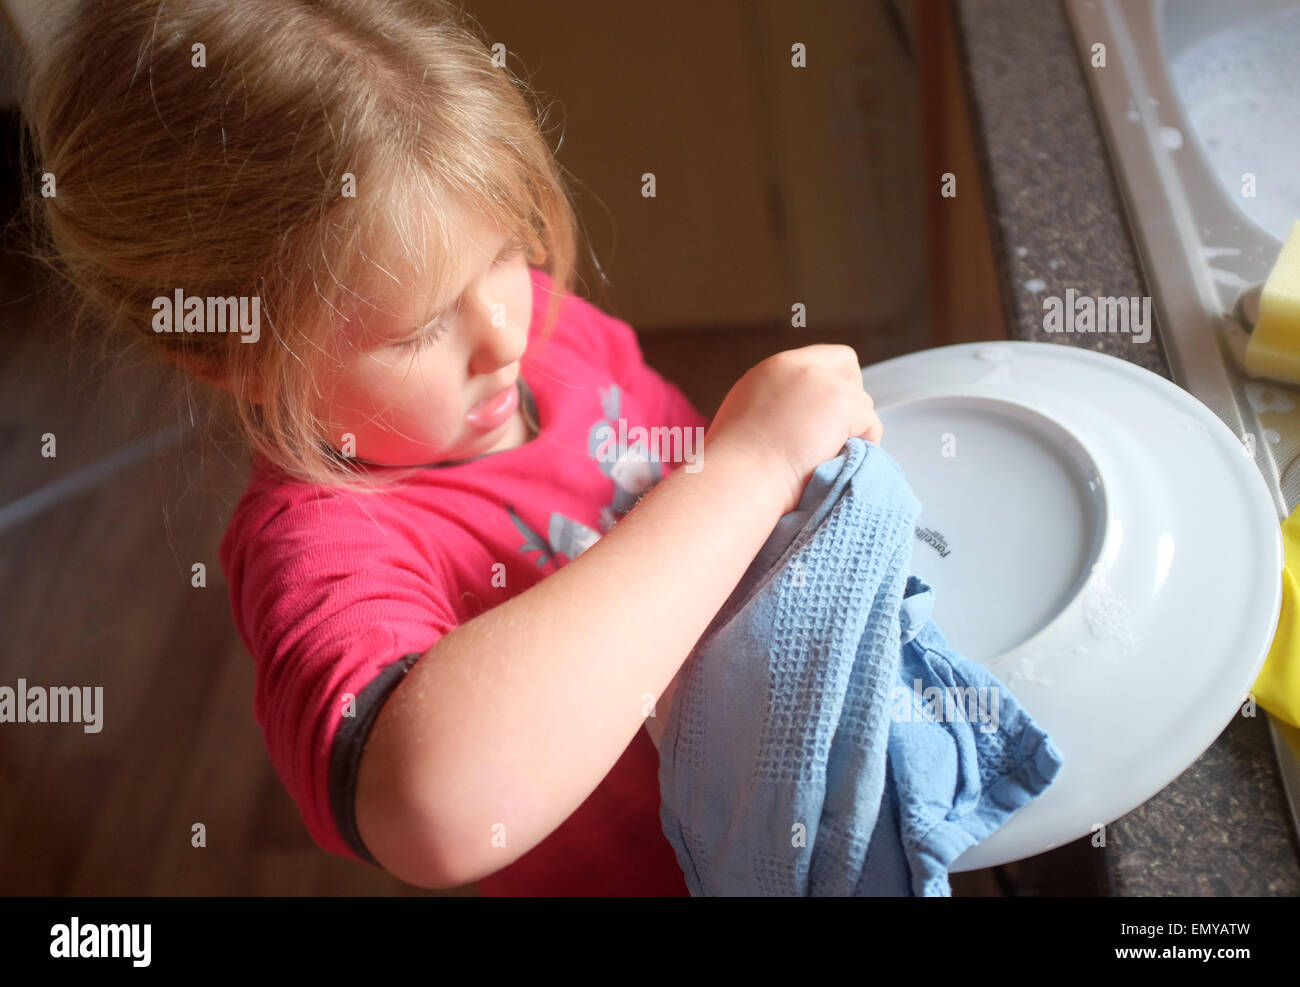 A young girl washing up and drying dishes Stock Photo